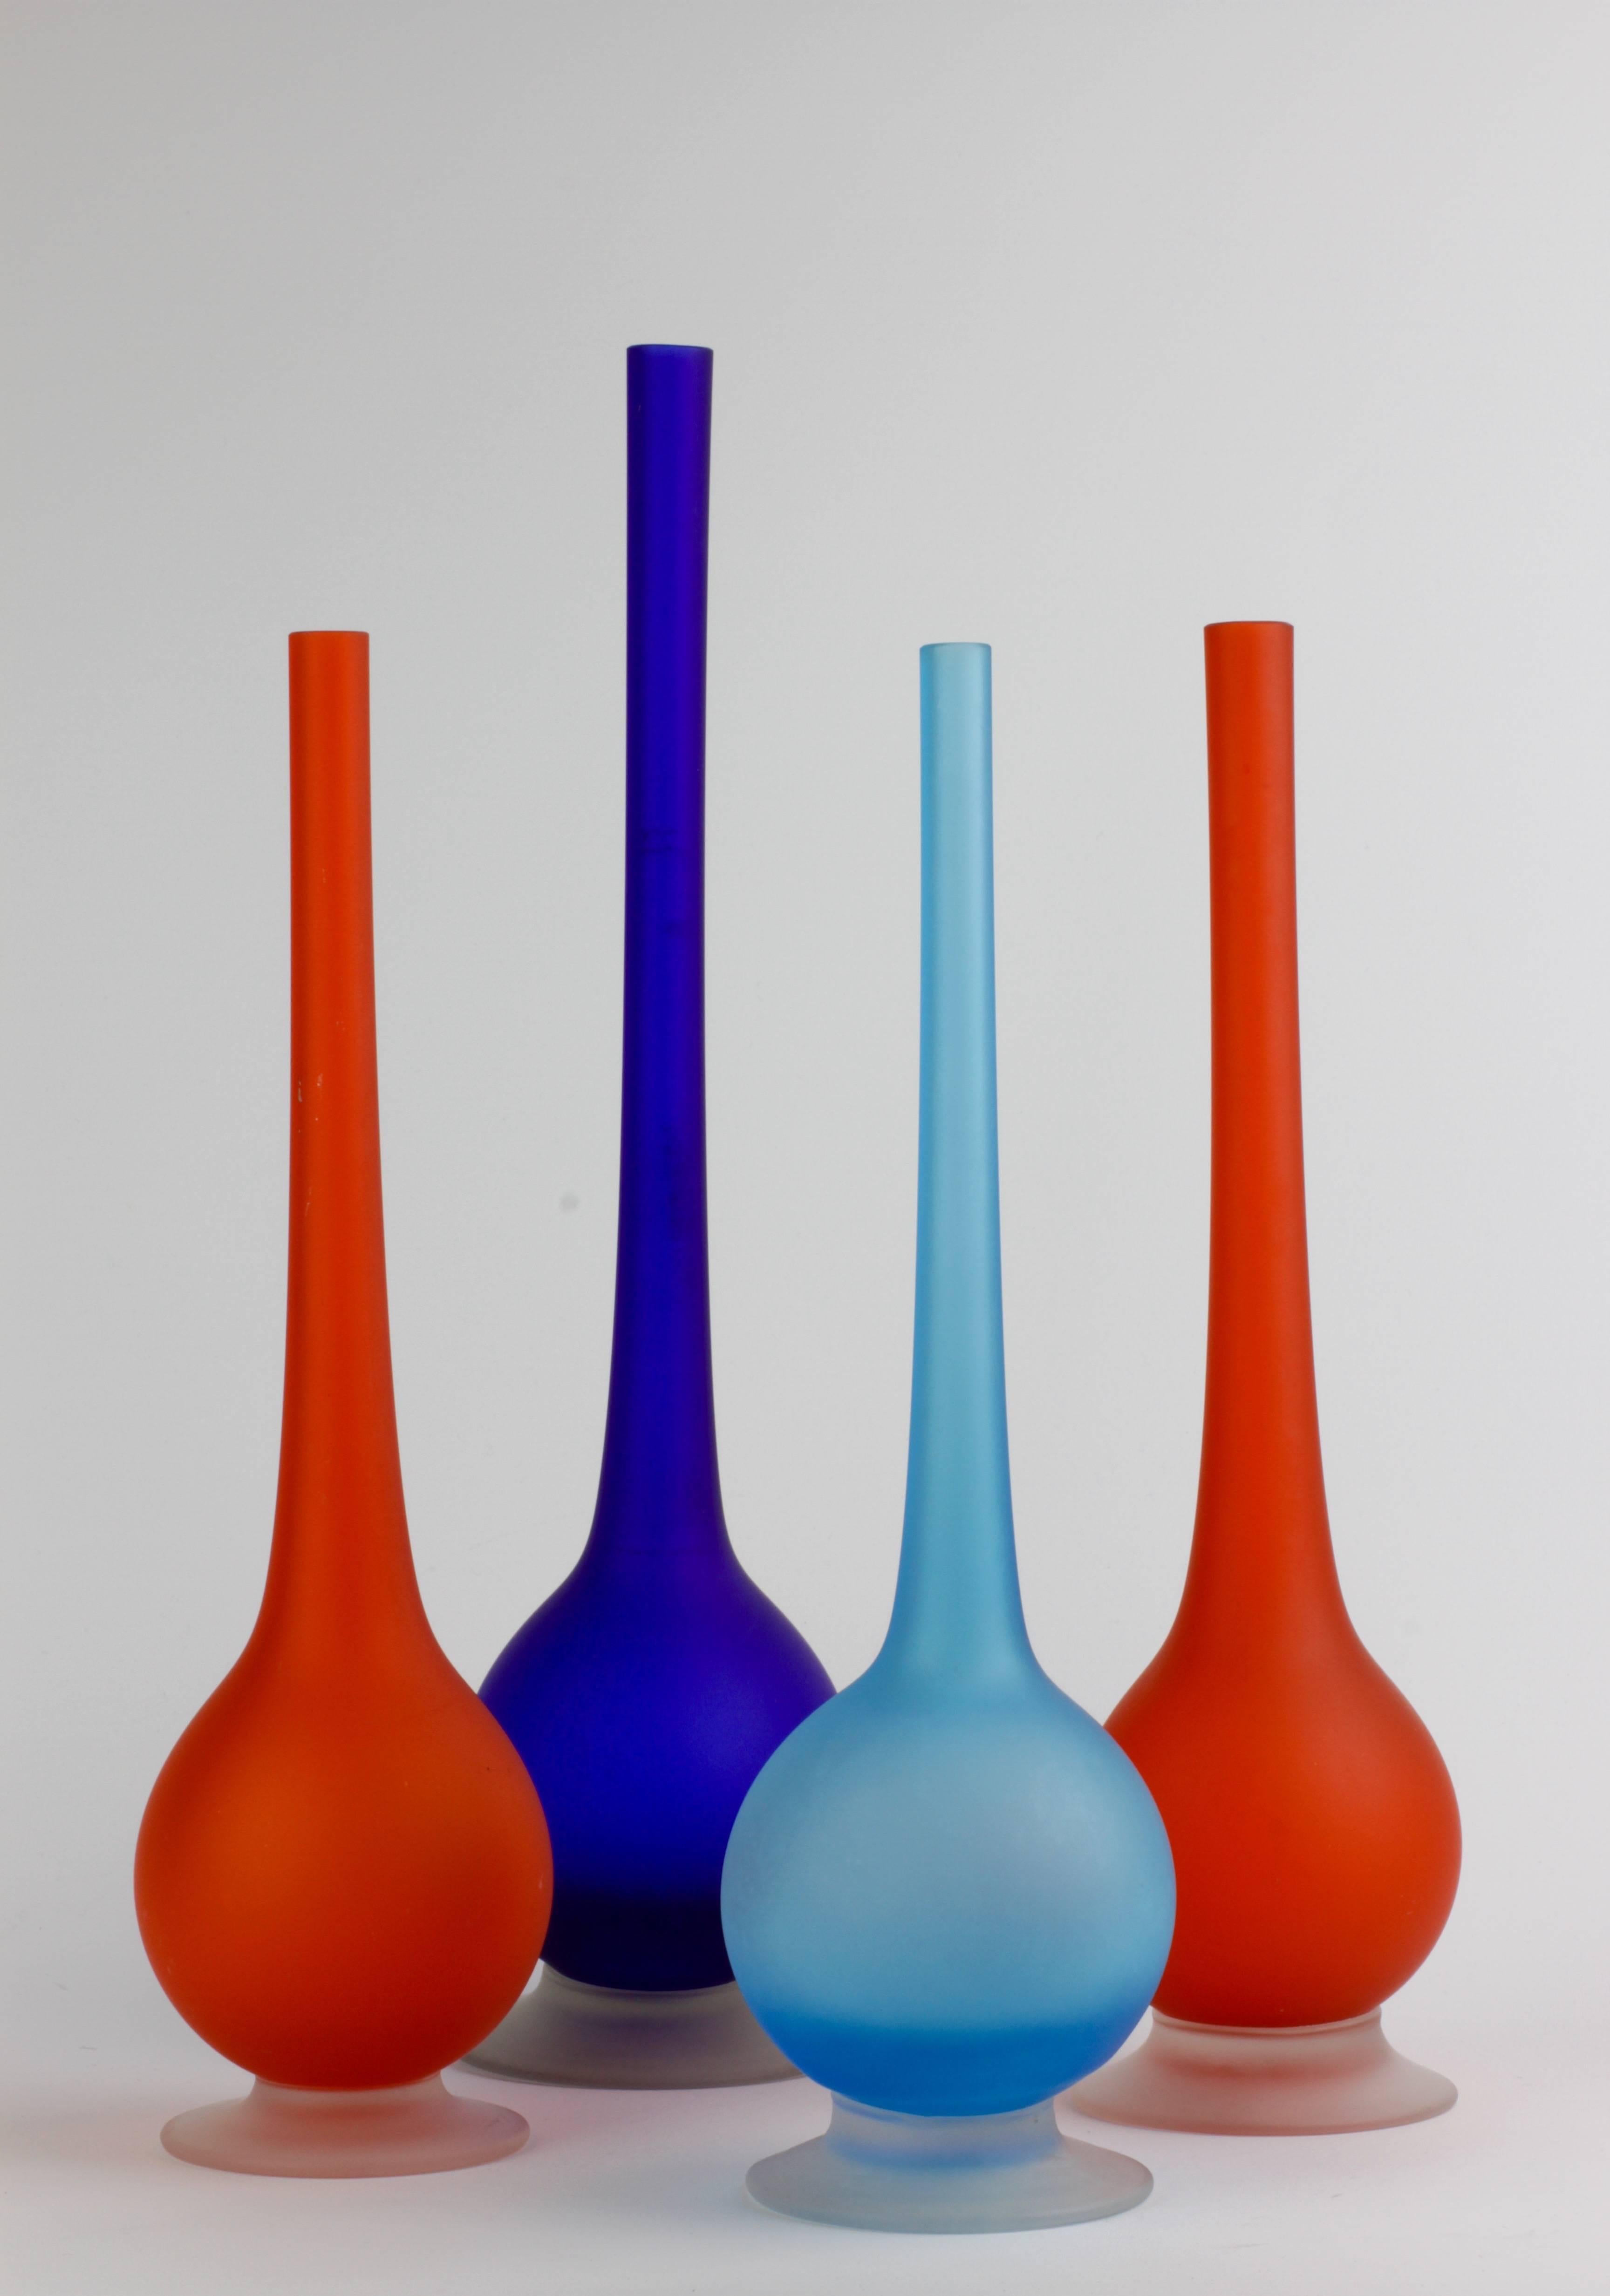 Stunning set of four Mid-Century Modern vibrant jellybean colored / colored satin Murano glass pencil vases by Carlo Moretti, circa 1970.

An absolutely bold yet elegant design with the use of bright, vivid blue and orange combined with the